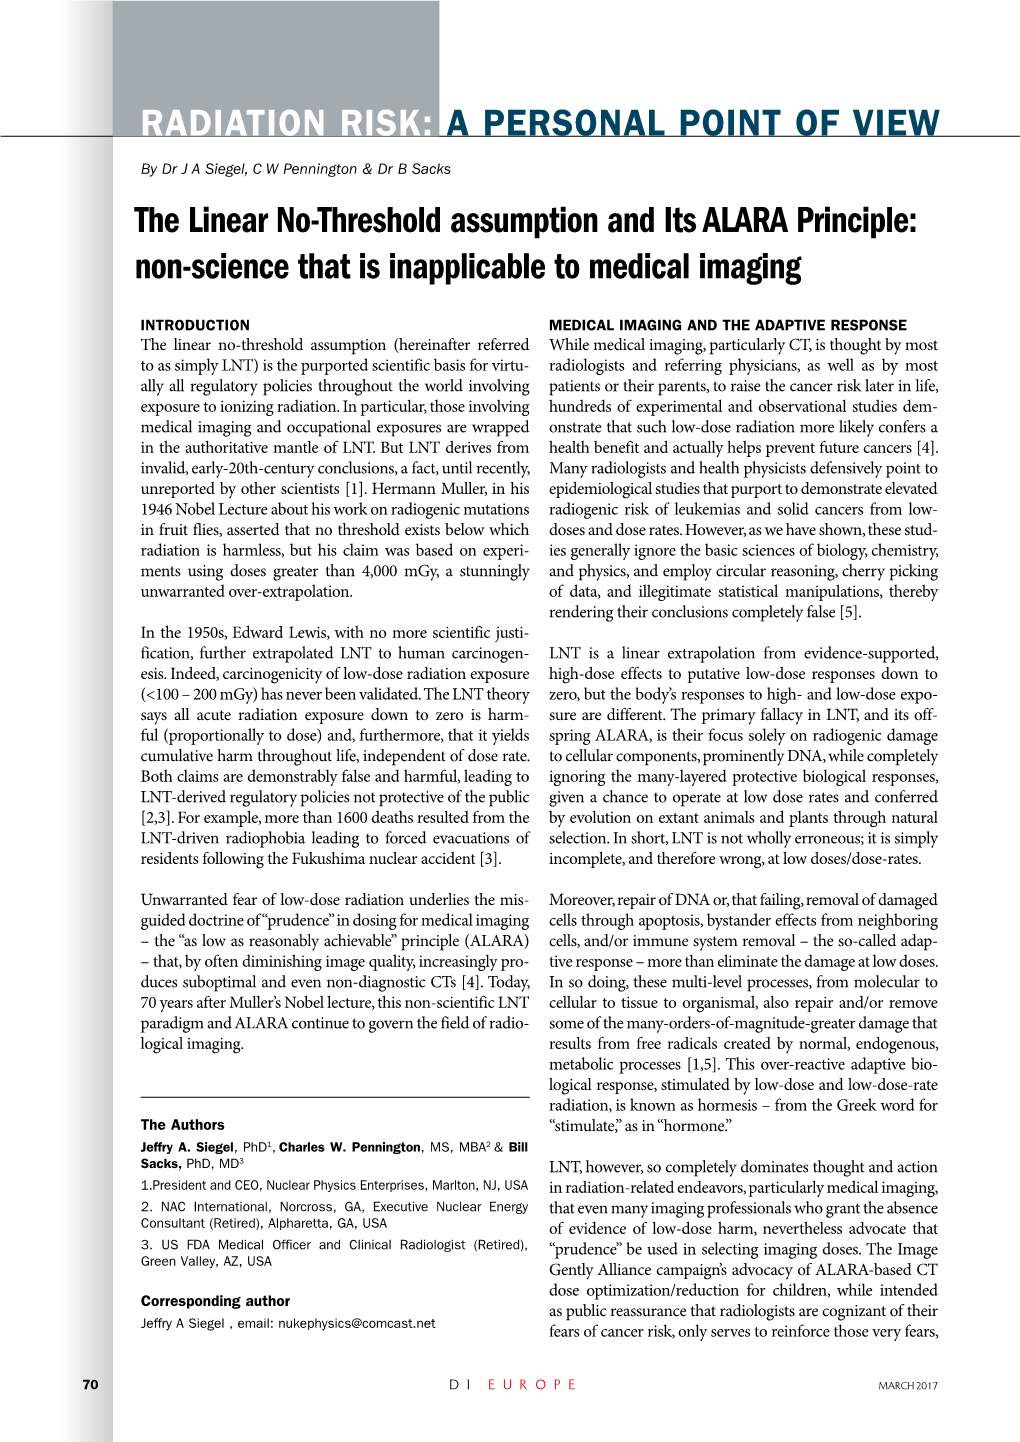 The Linear No-Threshold Assumption and Its Alara Principle: Non-Science That Is Inapplicable to Medical Imaging Radiation Risk